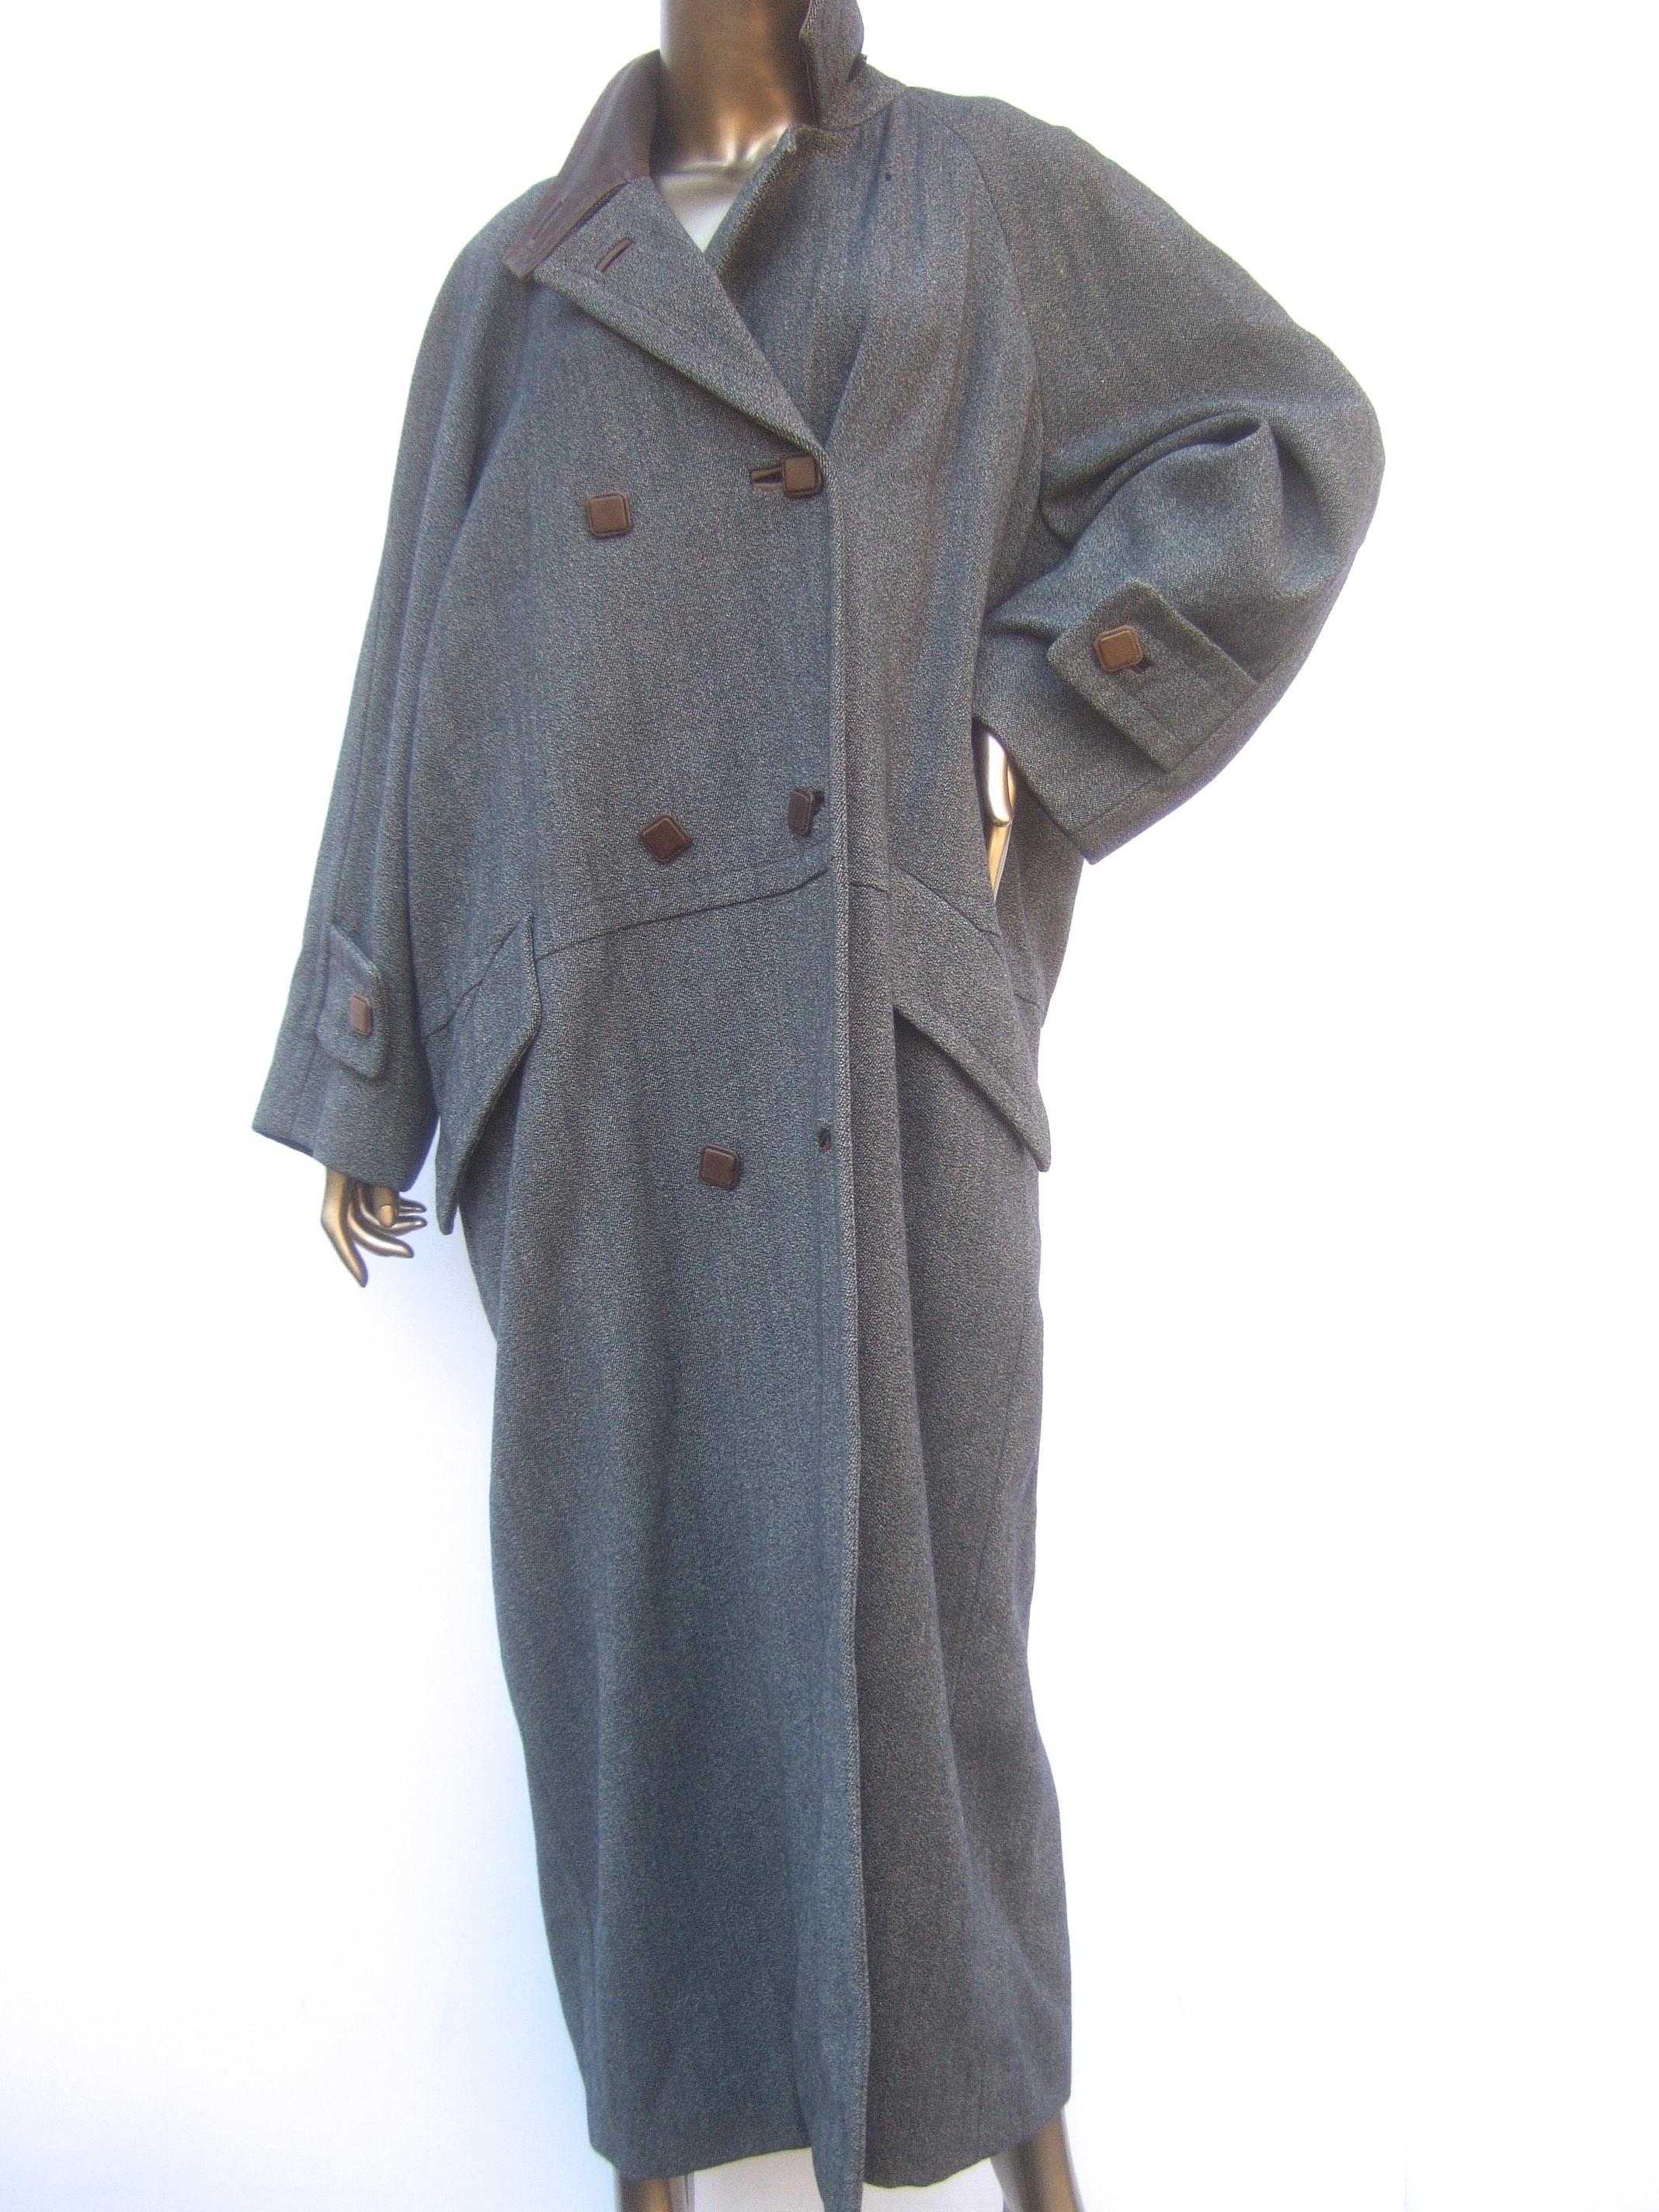 Hermes Paris Gray heavy gauge wool leather trim unisex winter coat c 1970s
The stylish vintage Hermes heavy wool coat is designed with a brown leather collar
Paired with brown leather square buttons that run down the front 

The coat is lined in